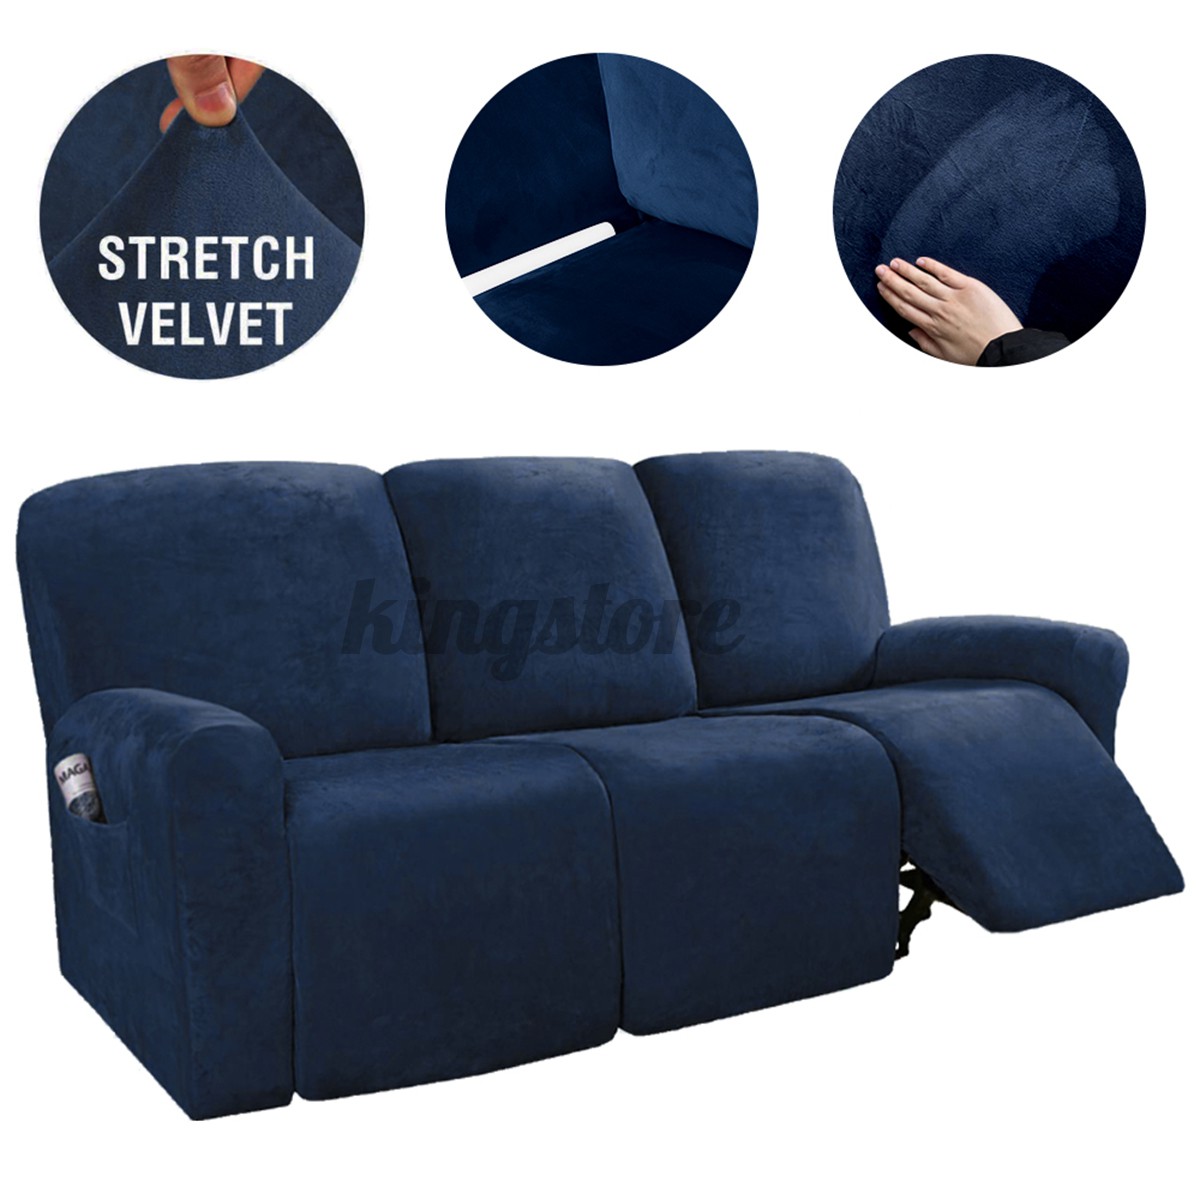 Velvet Soft Stretch Three Seat Recliner, Furniture Covers For Reclining Sofas